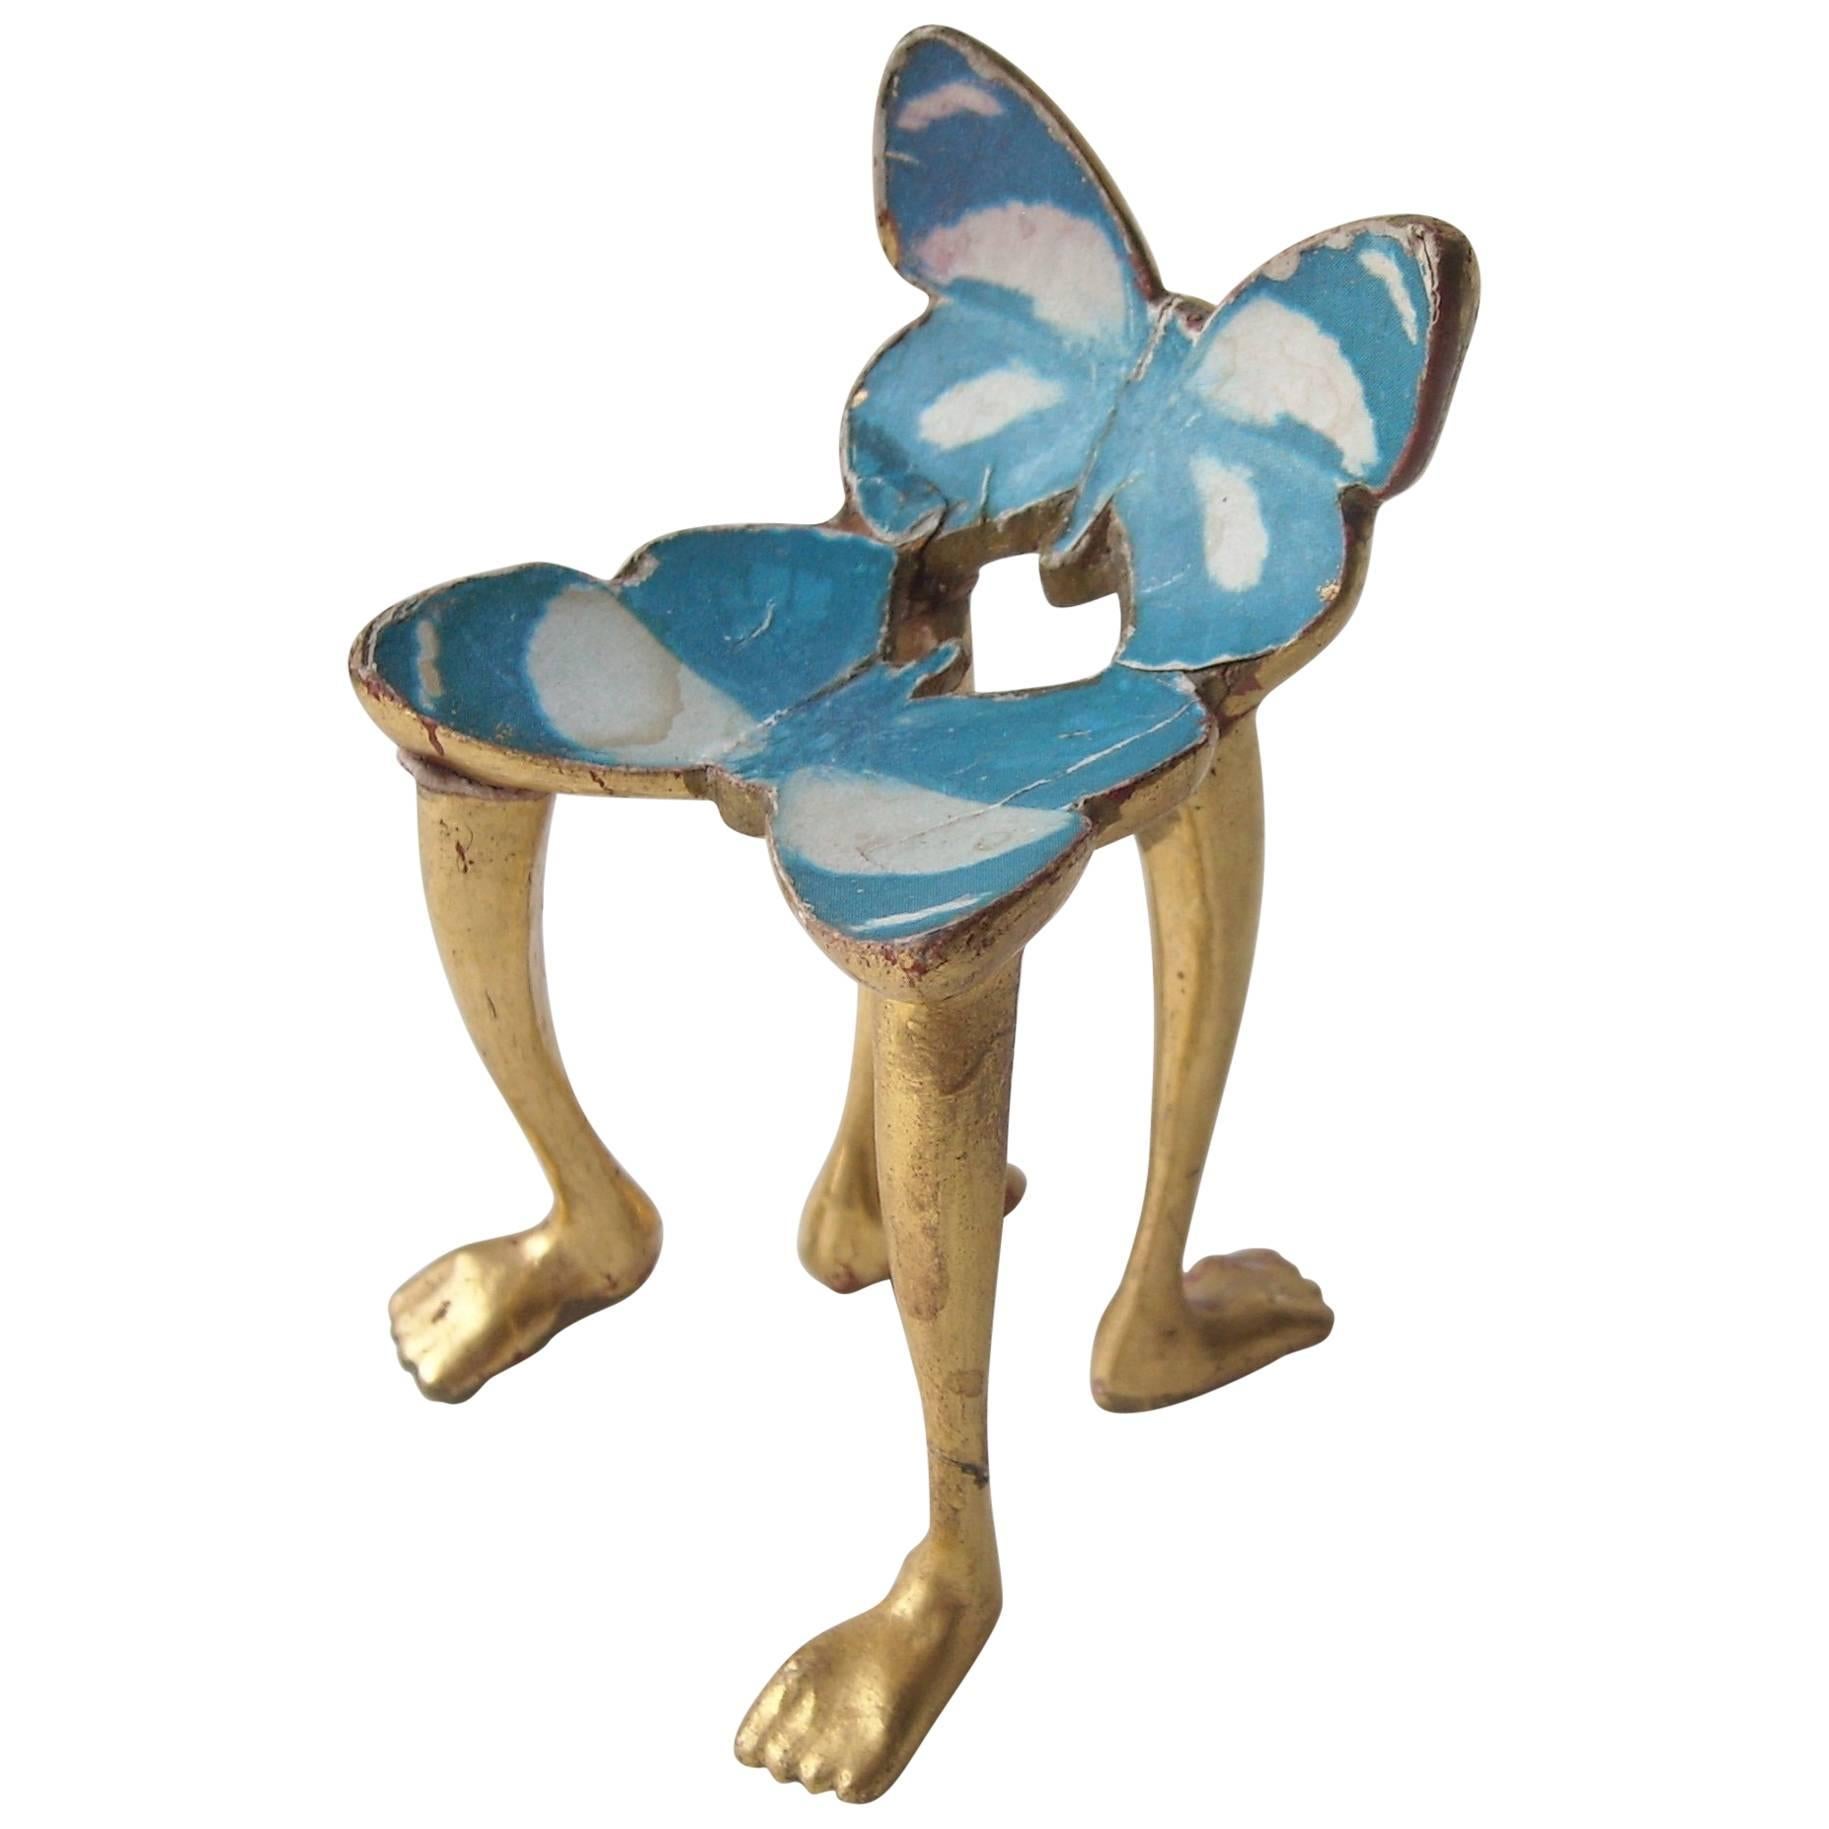 Pedro Friedeberg "Butterfly Chair" Miniature, Sculpture, Surrealist, Signed